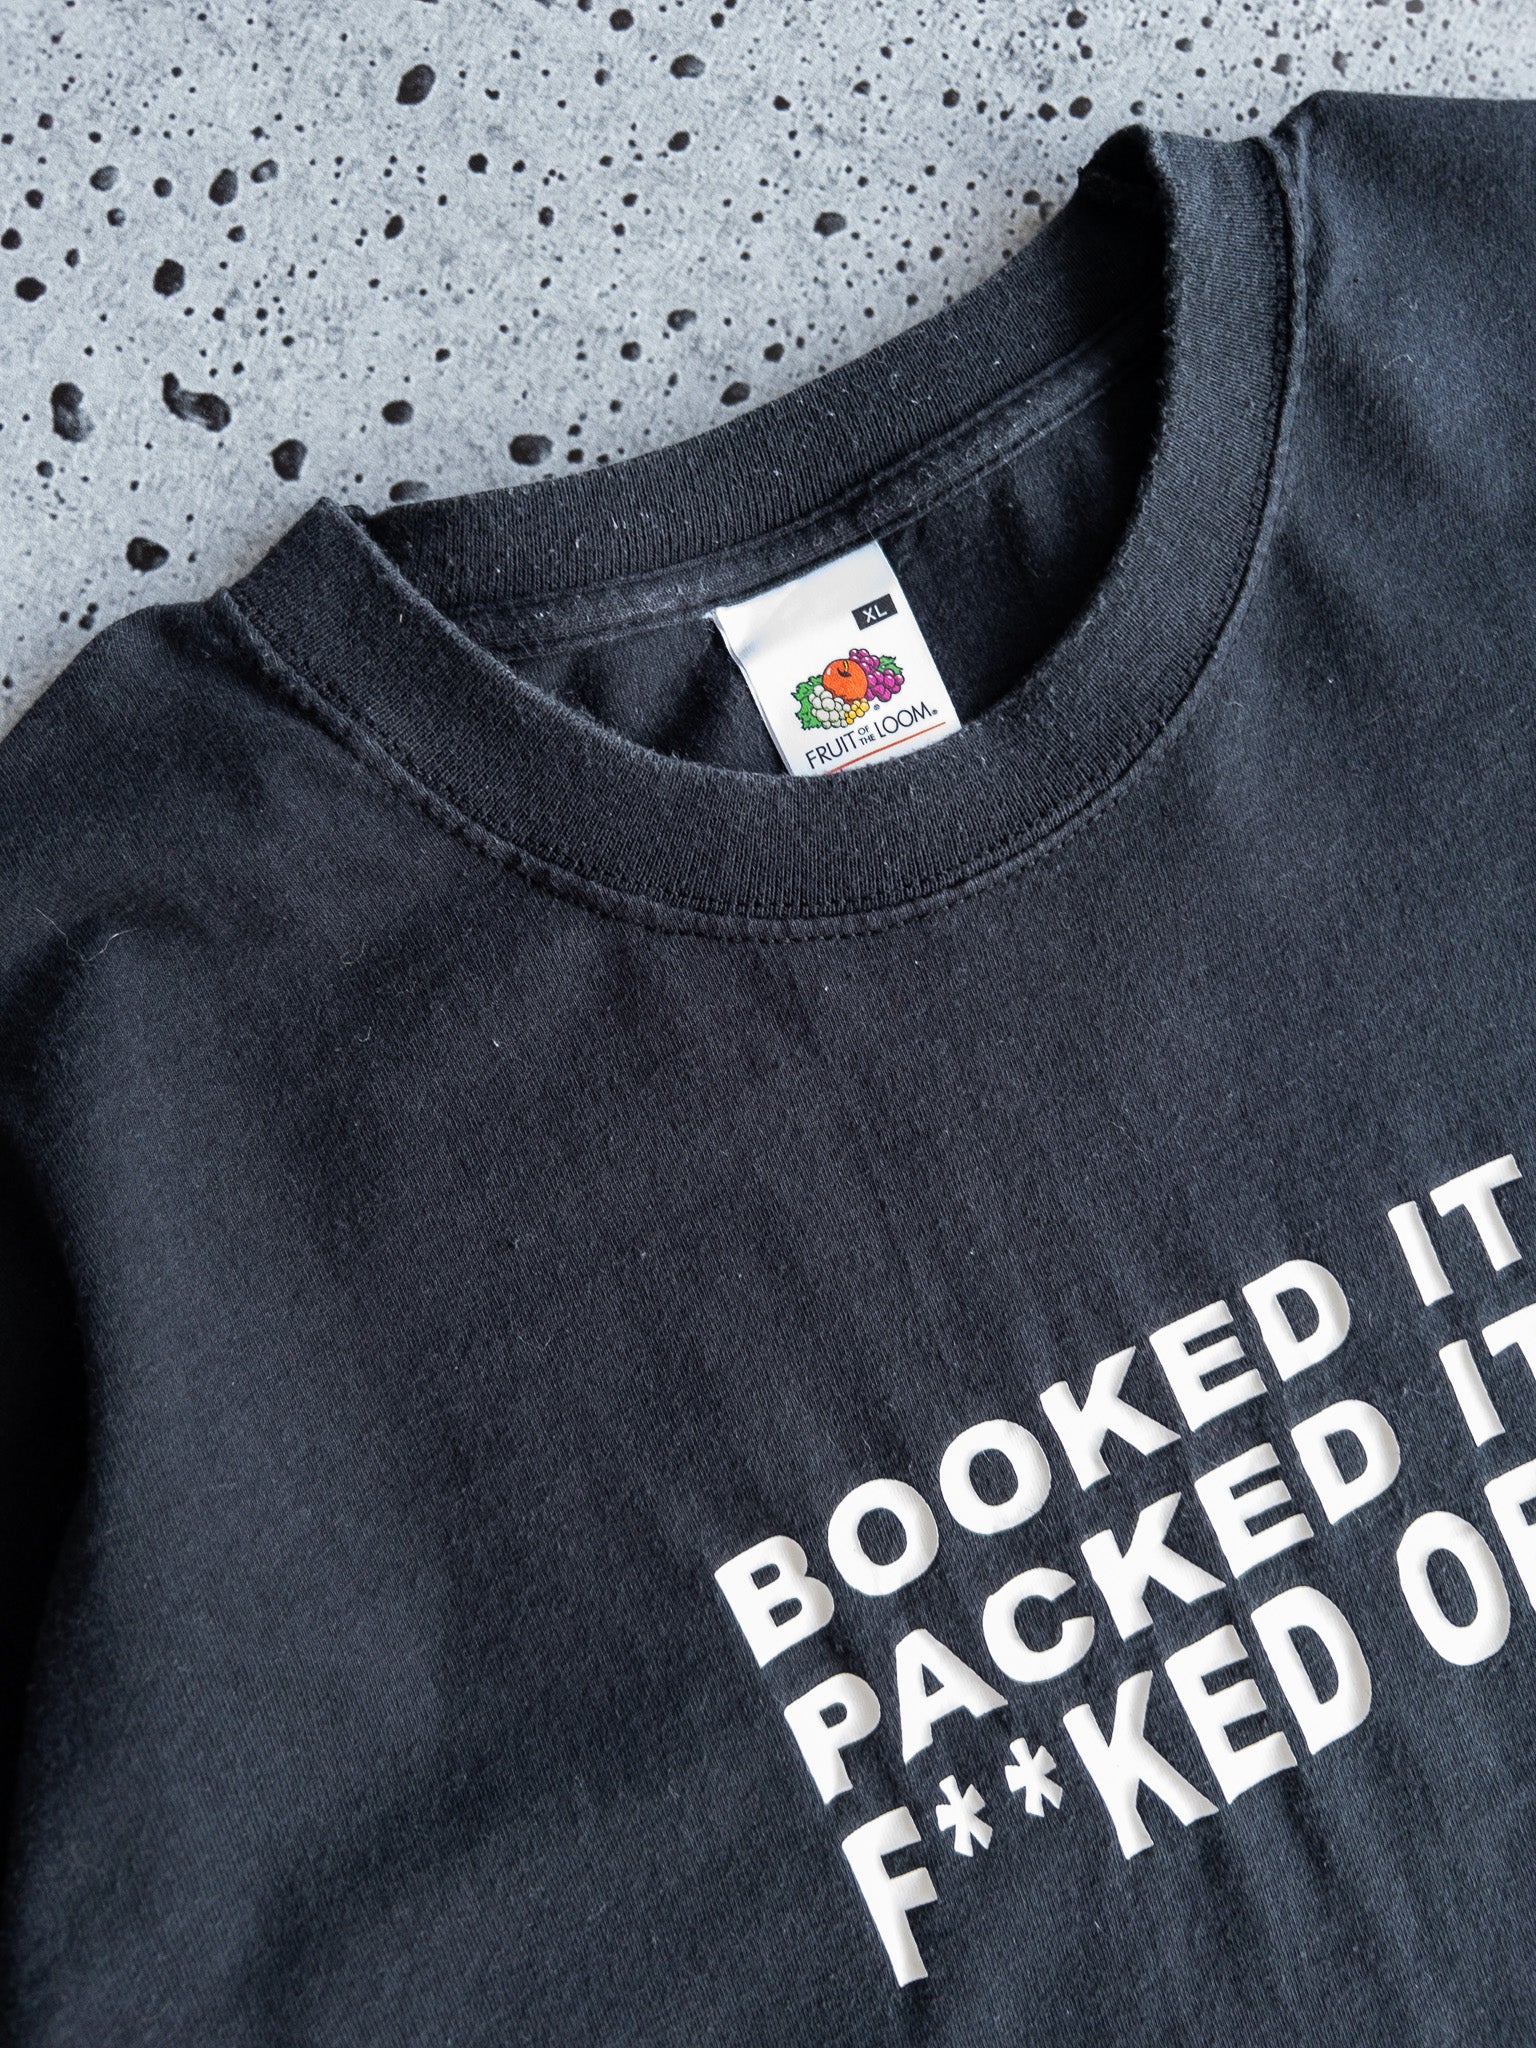 Vintage Booked It, Packed It, F**ked Off Tee (XL)